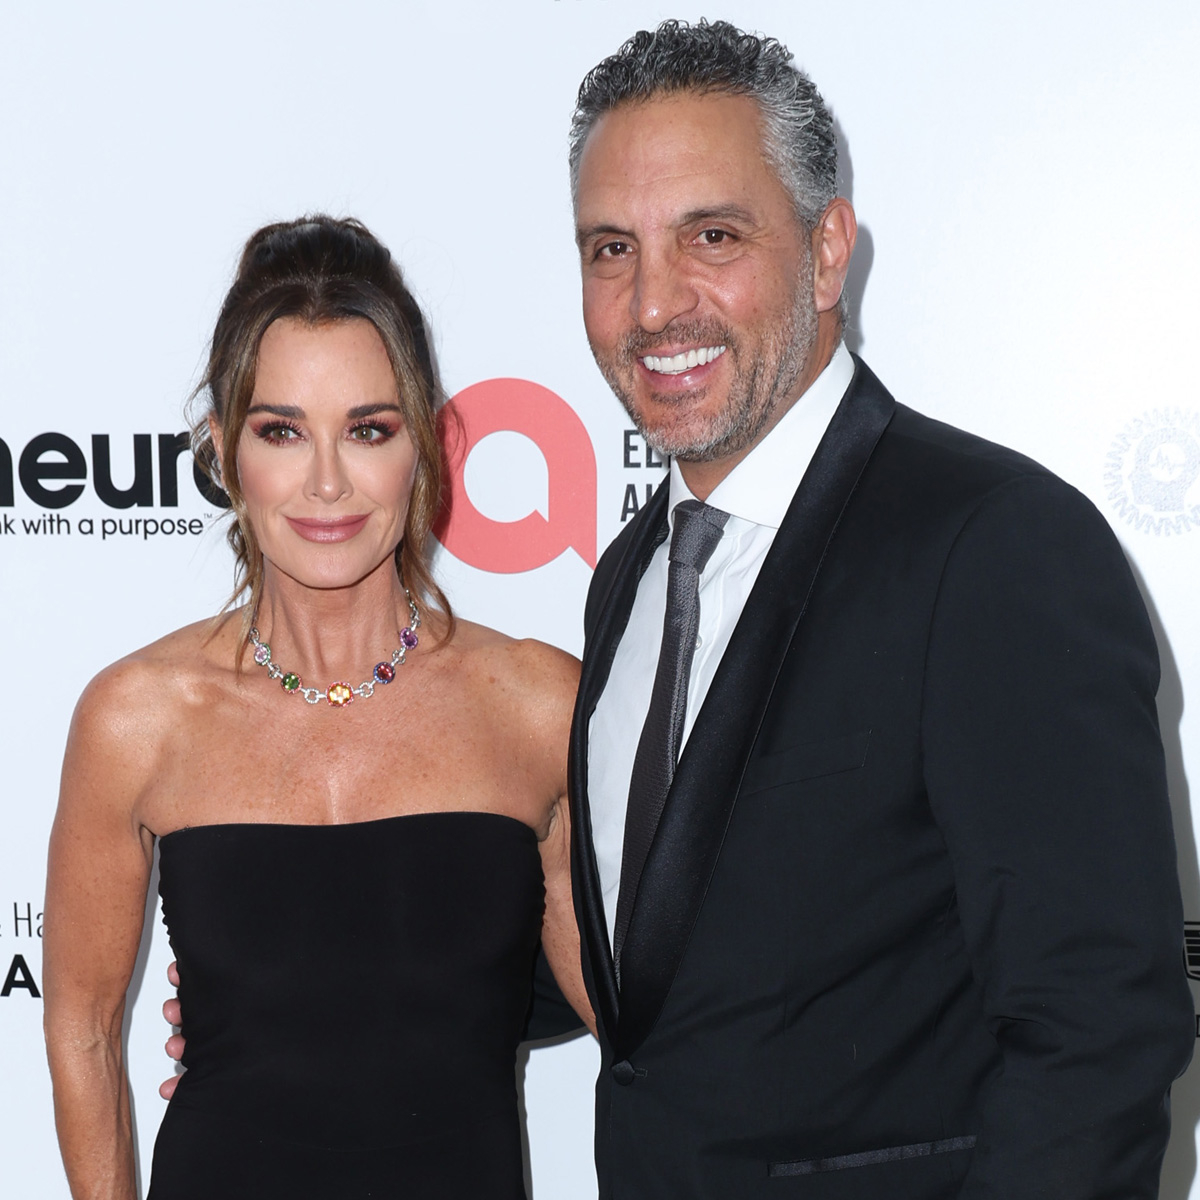 Kyle Richards & Mauricio Umansky's Marriage Cracks Are Clearer Than Ever in Bleak RHOBH Preview